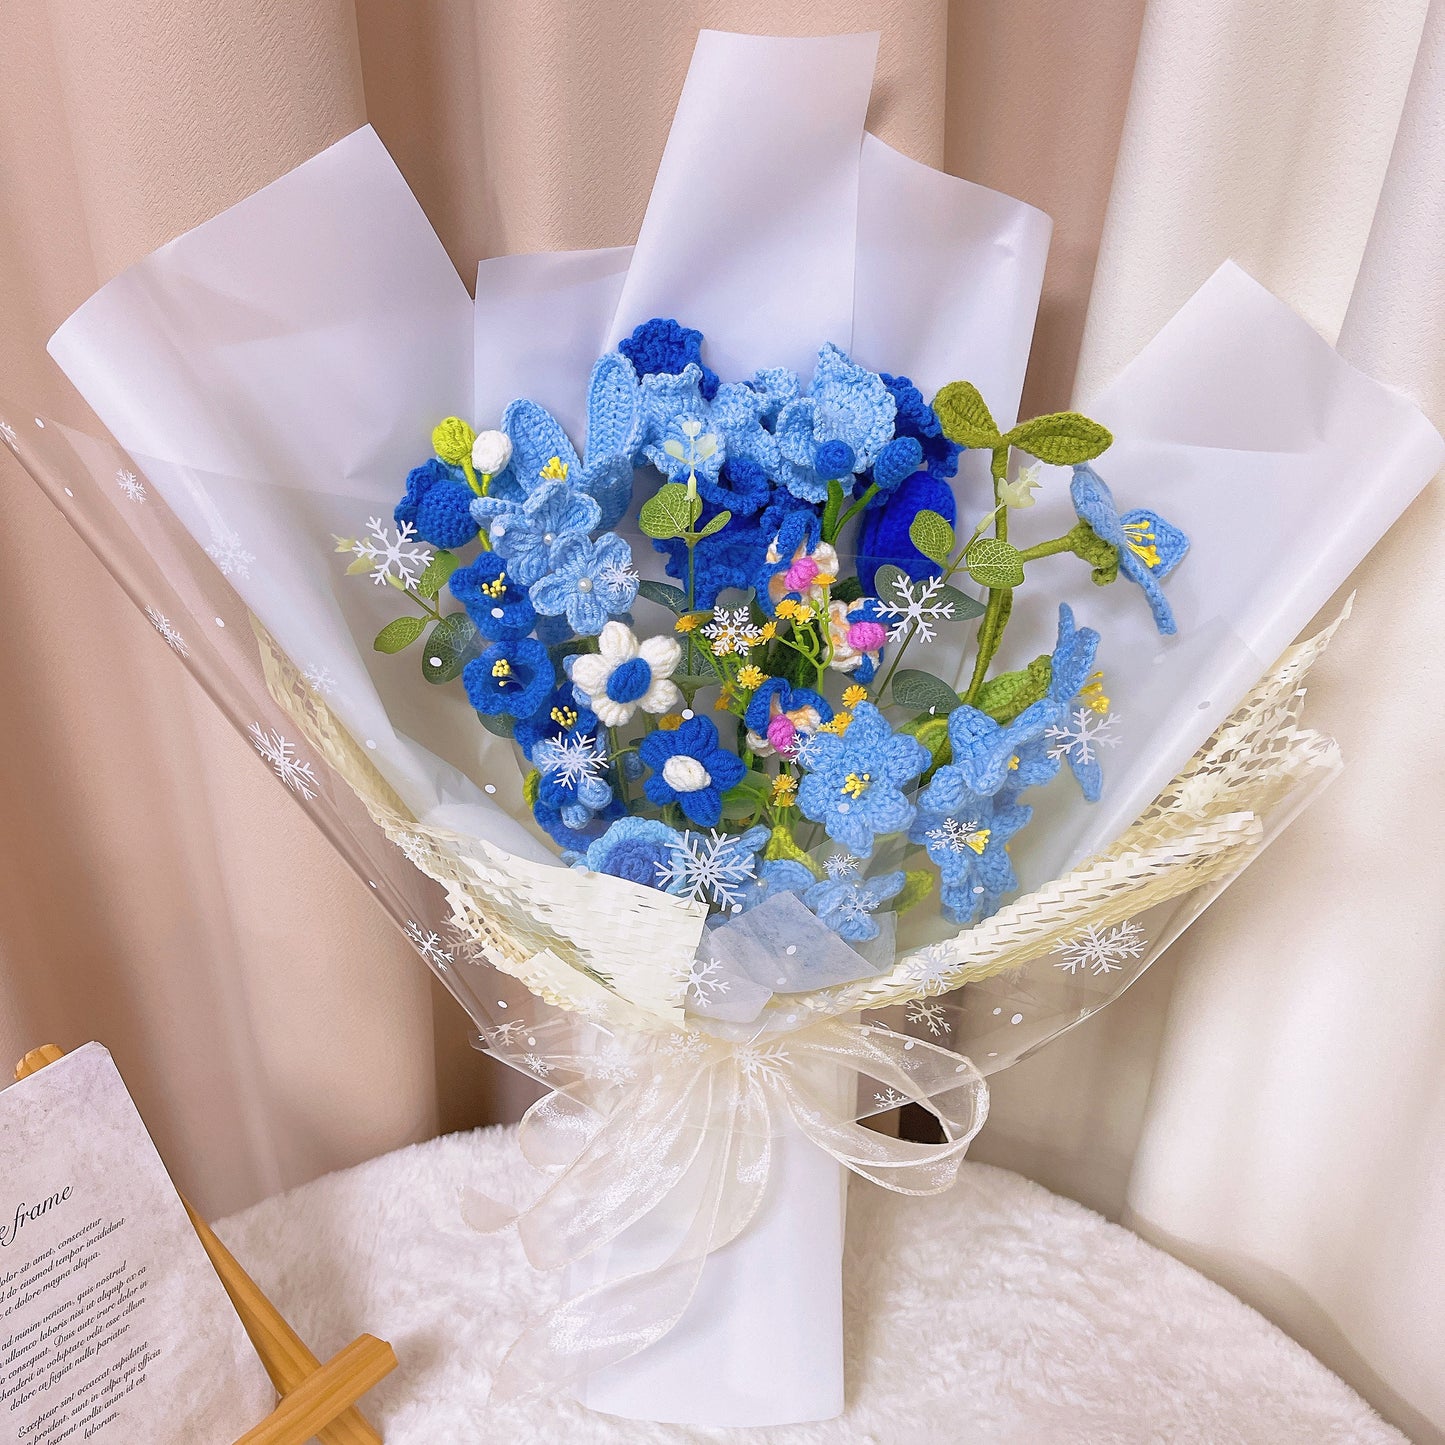 Handcrafted Crochet ALL BLUE Floral Arrangement Bouquet with White Wrapping and Delicate Snowflake Design